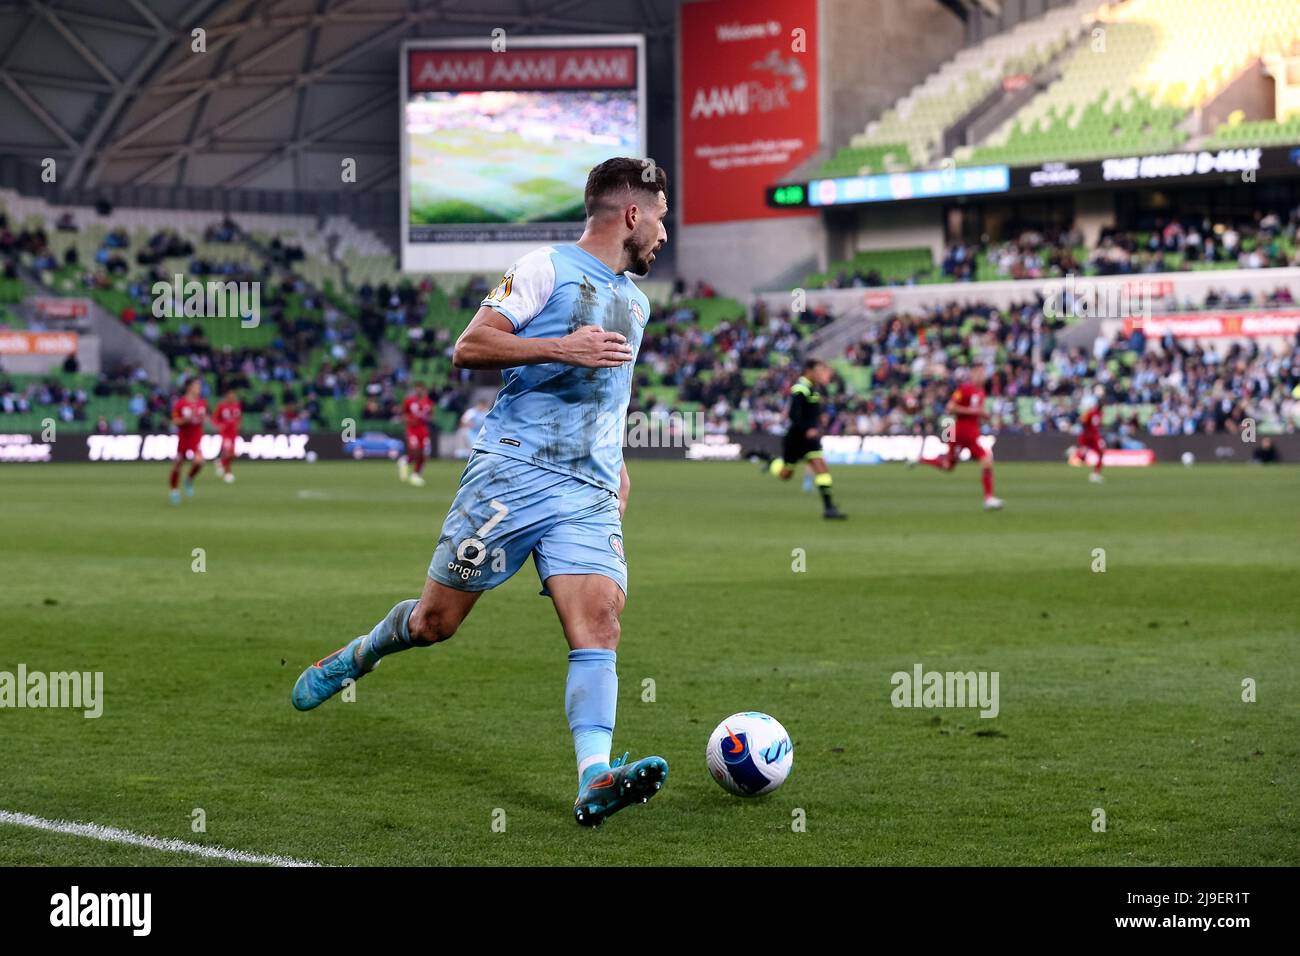 Melbourne, Australia, 22 May, 2022. Mathew Leckie of Melbourne City FC controls the ball during the A-League Semi Final soccer match between Melbourne City FC and Adelaide United at AAMI Park on May 22, 2022 in Melbourne, Australia. Credit: Dave Hewison/Speed Media/Alamy Live News Stock Photo